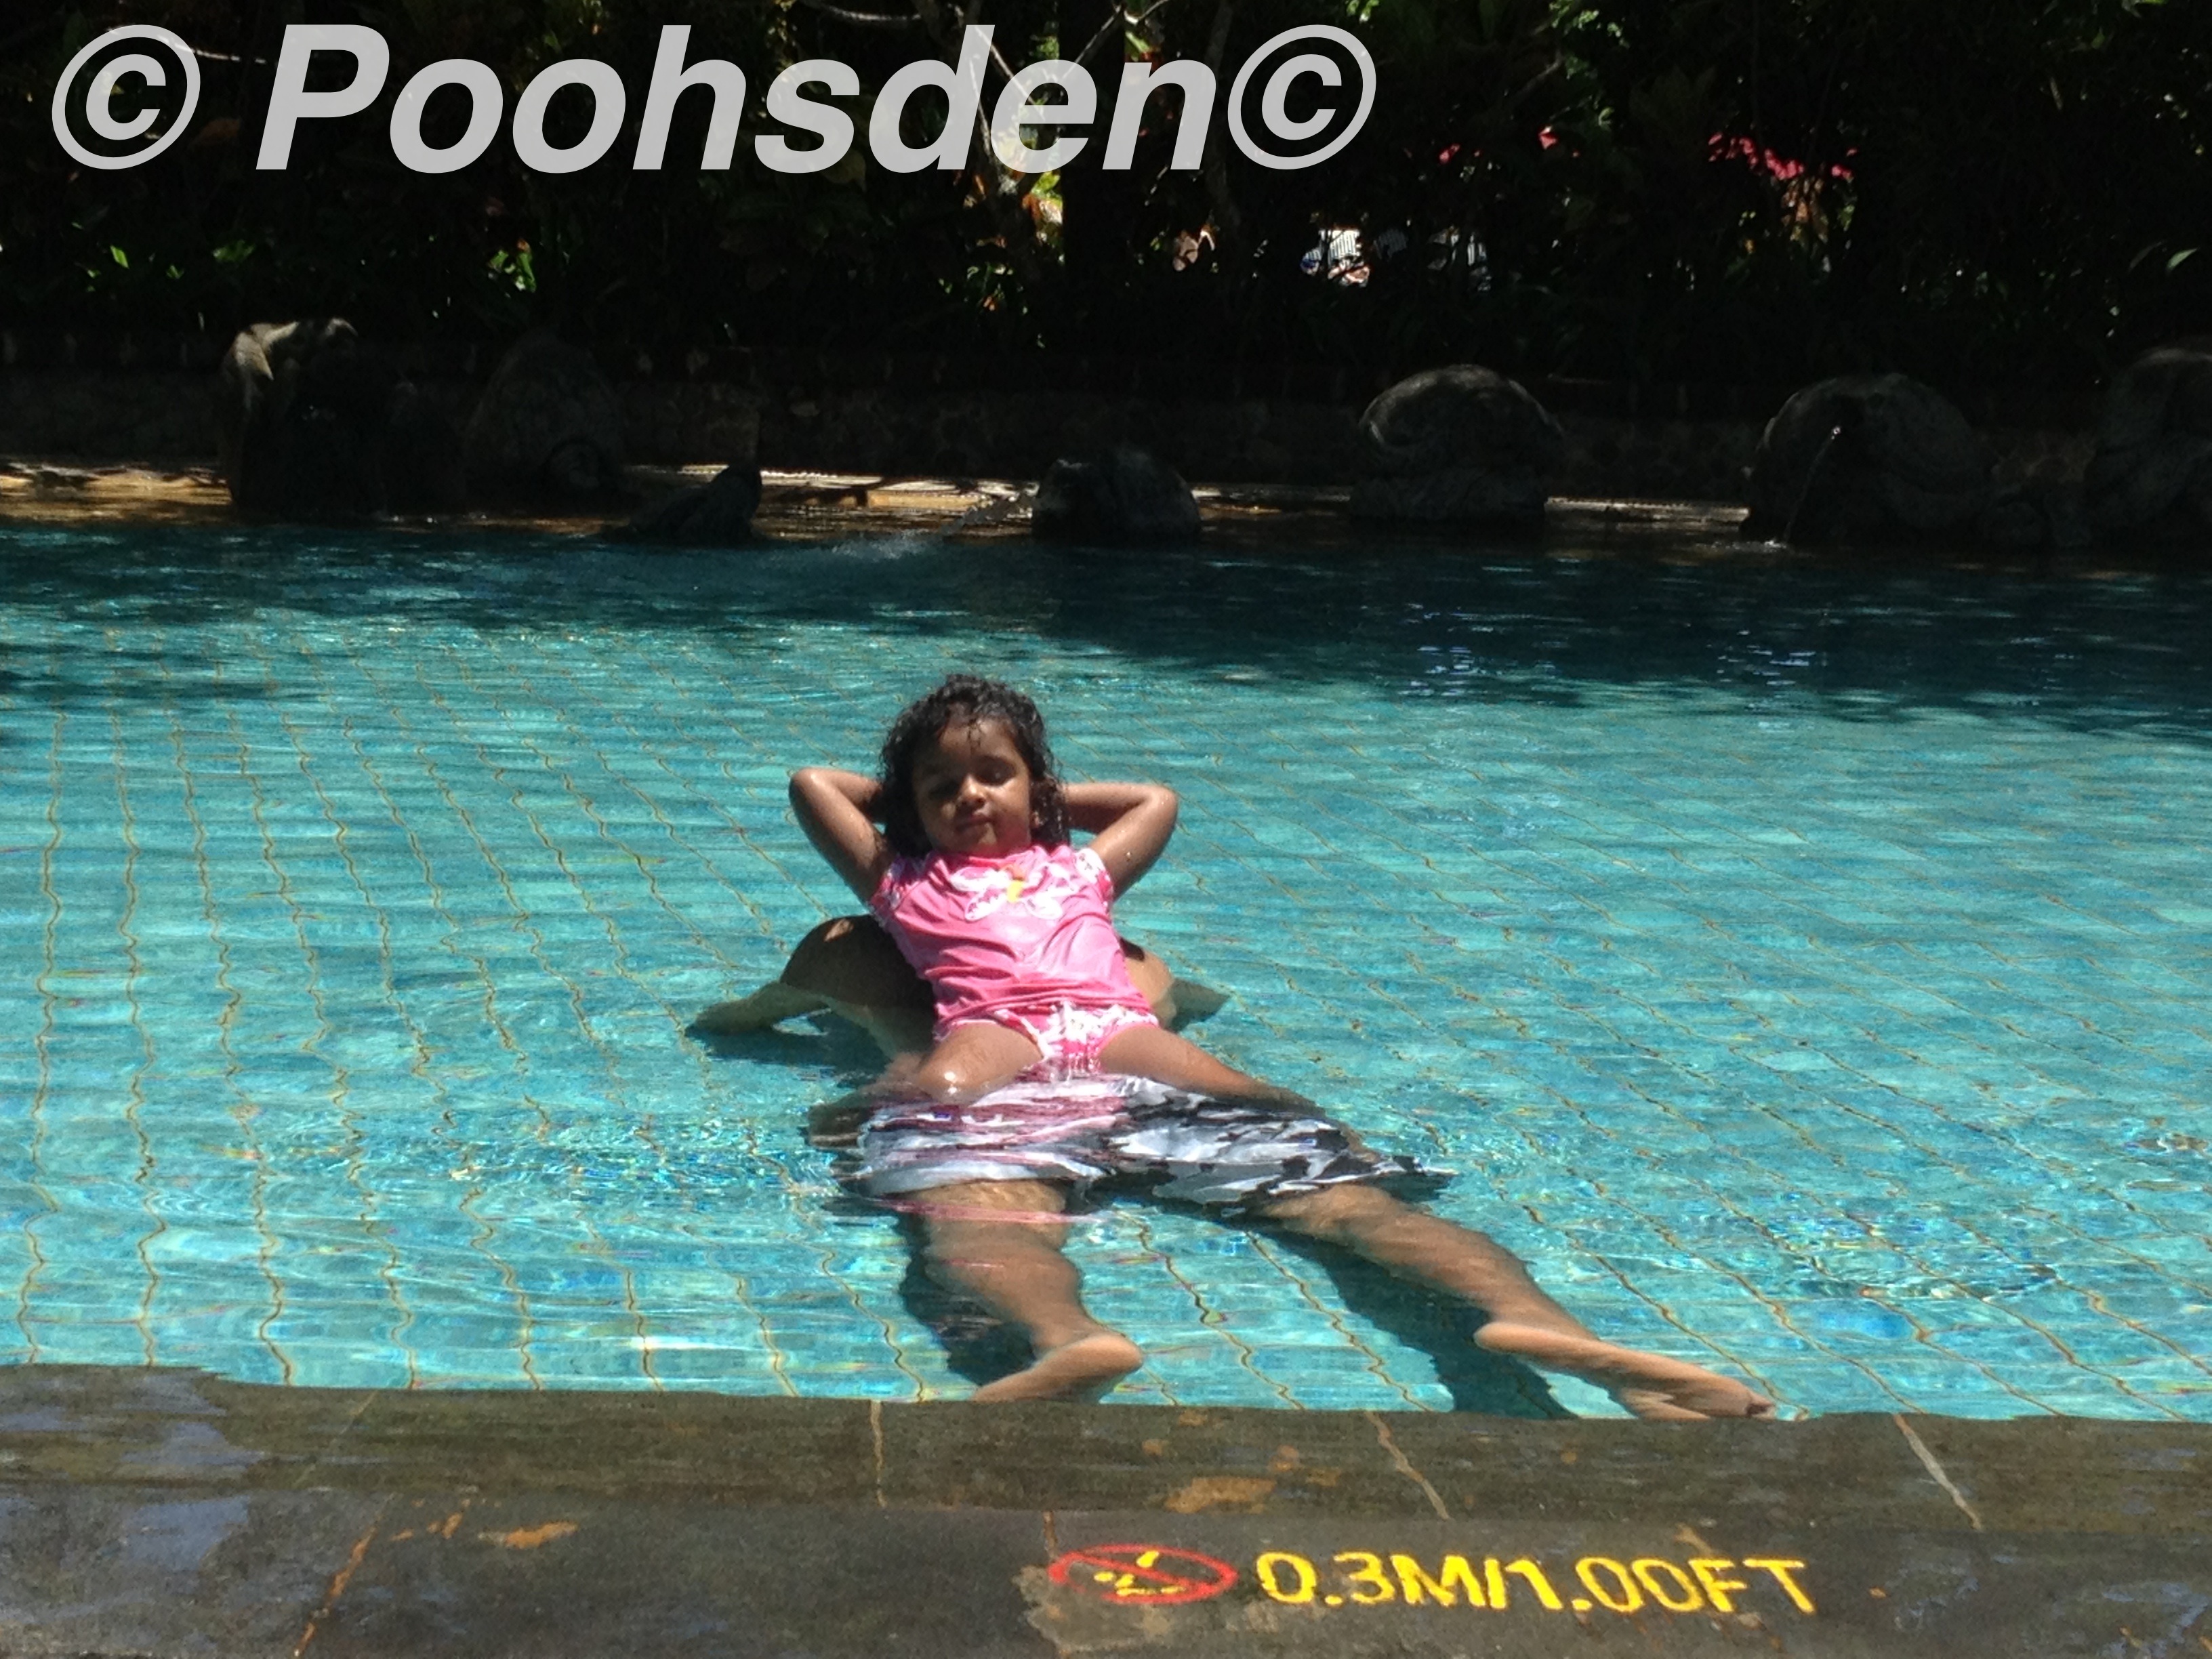 Her Highness on her pool throne, Bali